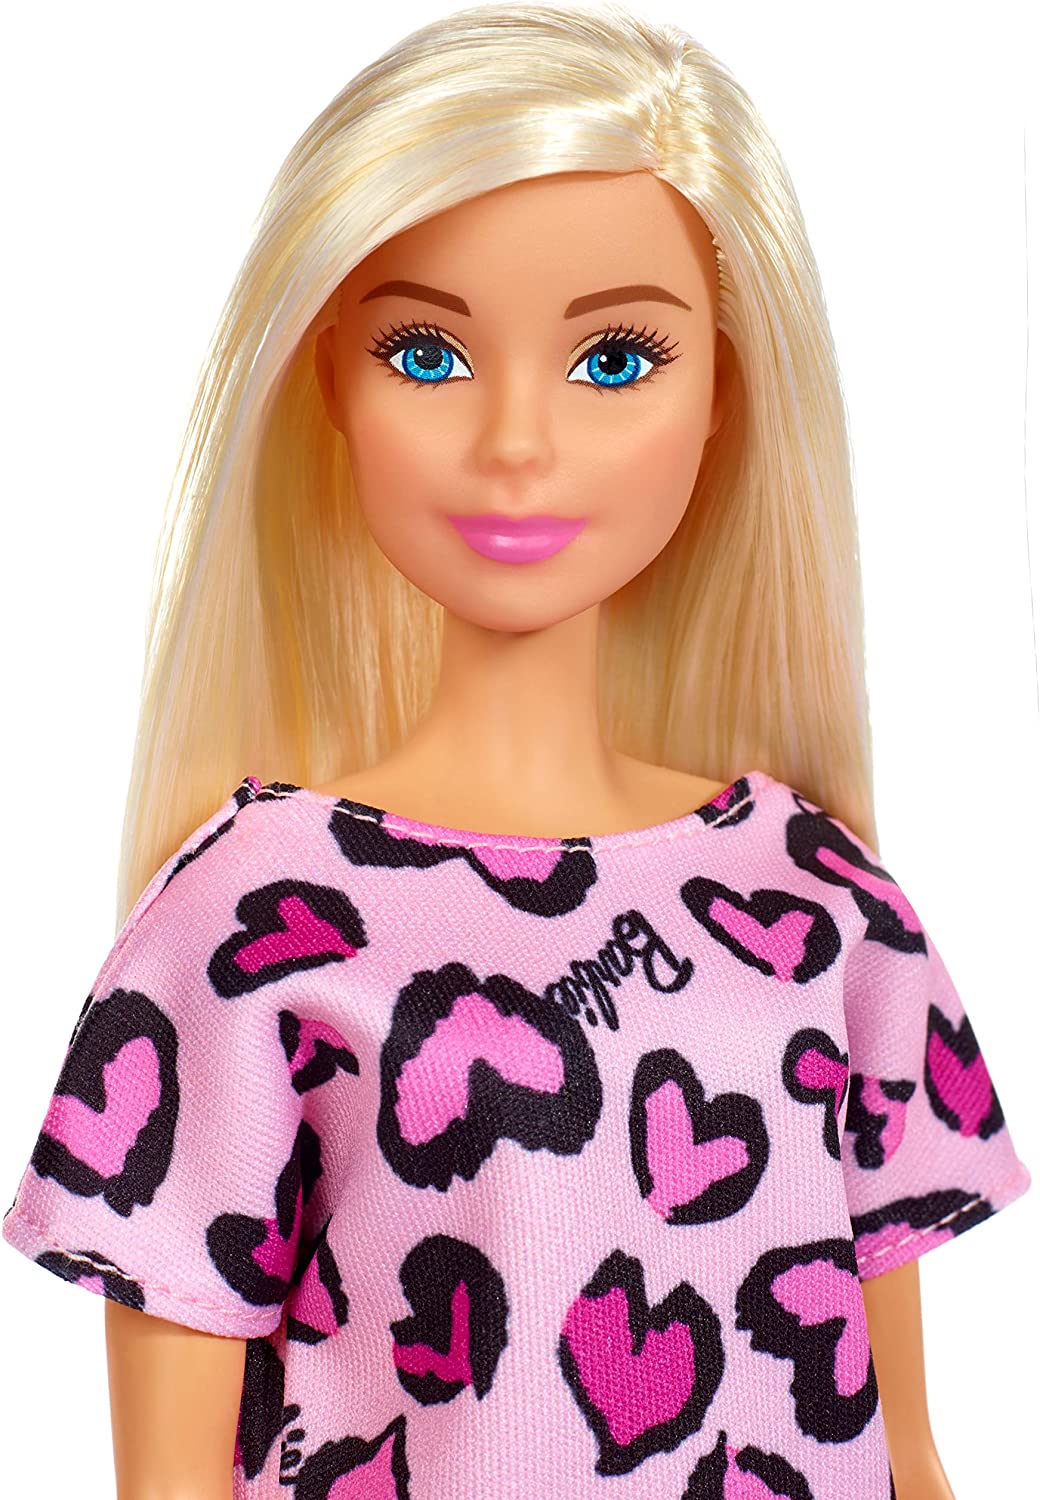 Barbie Doll Blonde Wearing Heart-Print Dress And Shoe Pink